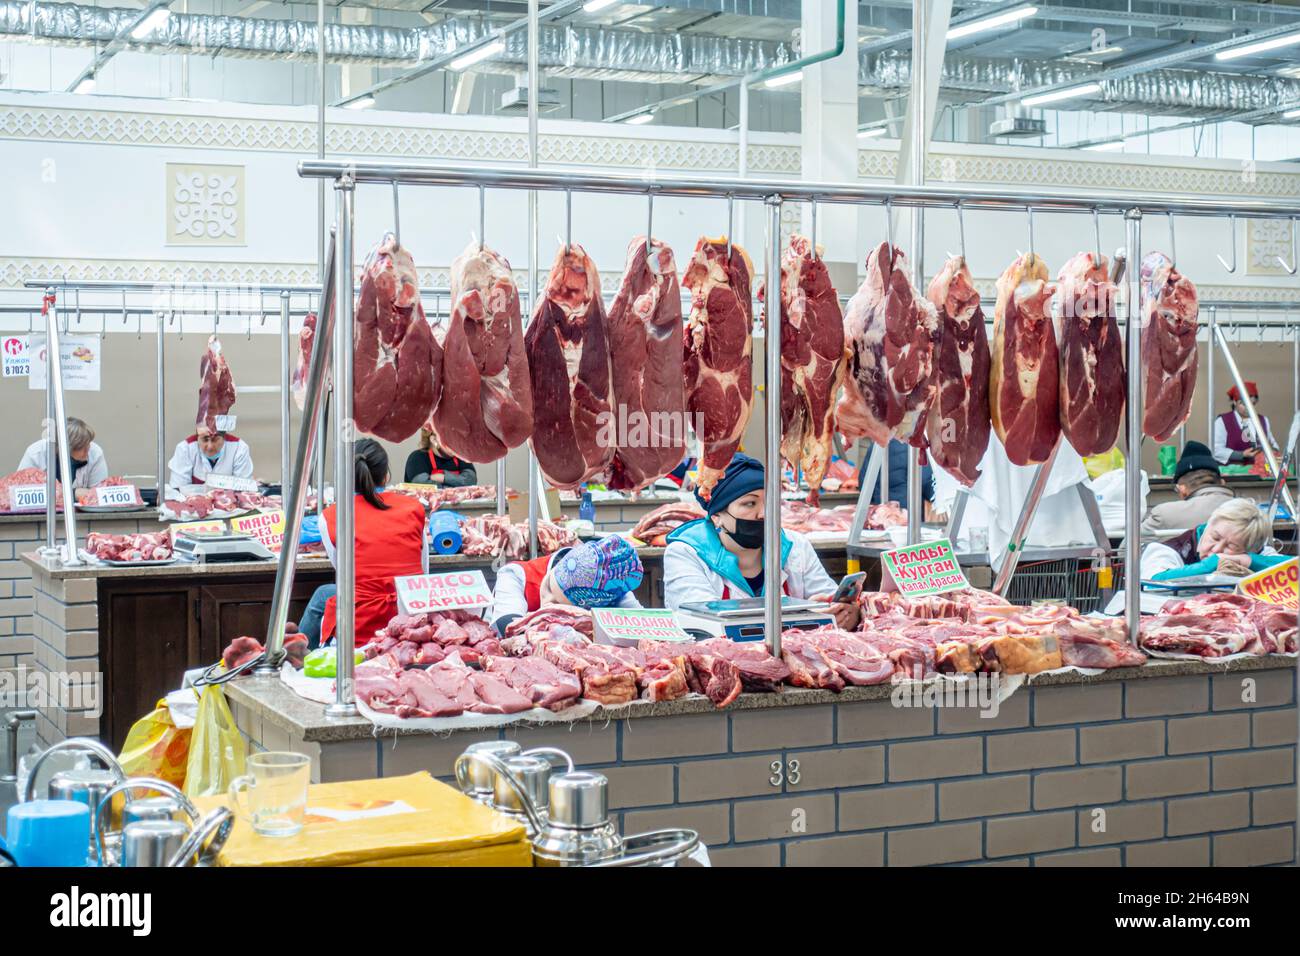 Raw meat display the Altyn Orda market, the largest marketplace in Almaty, Kazakhstan. Cut meat pieces hanging; vendors behind counters. Stock Photo